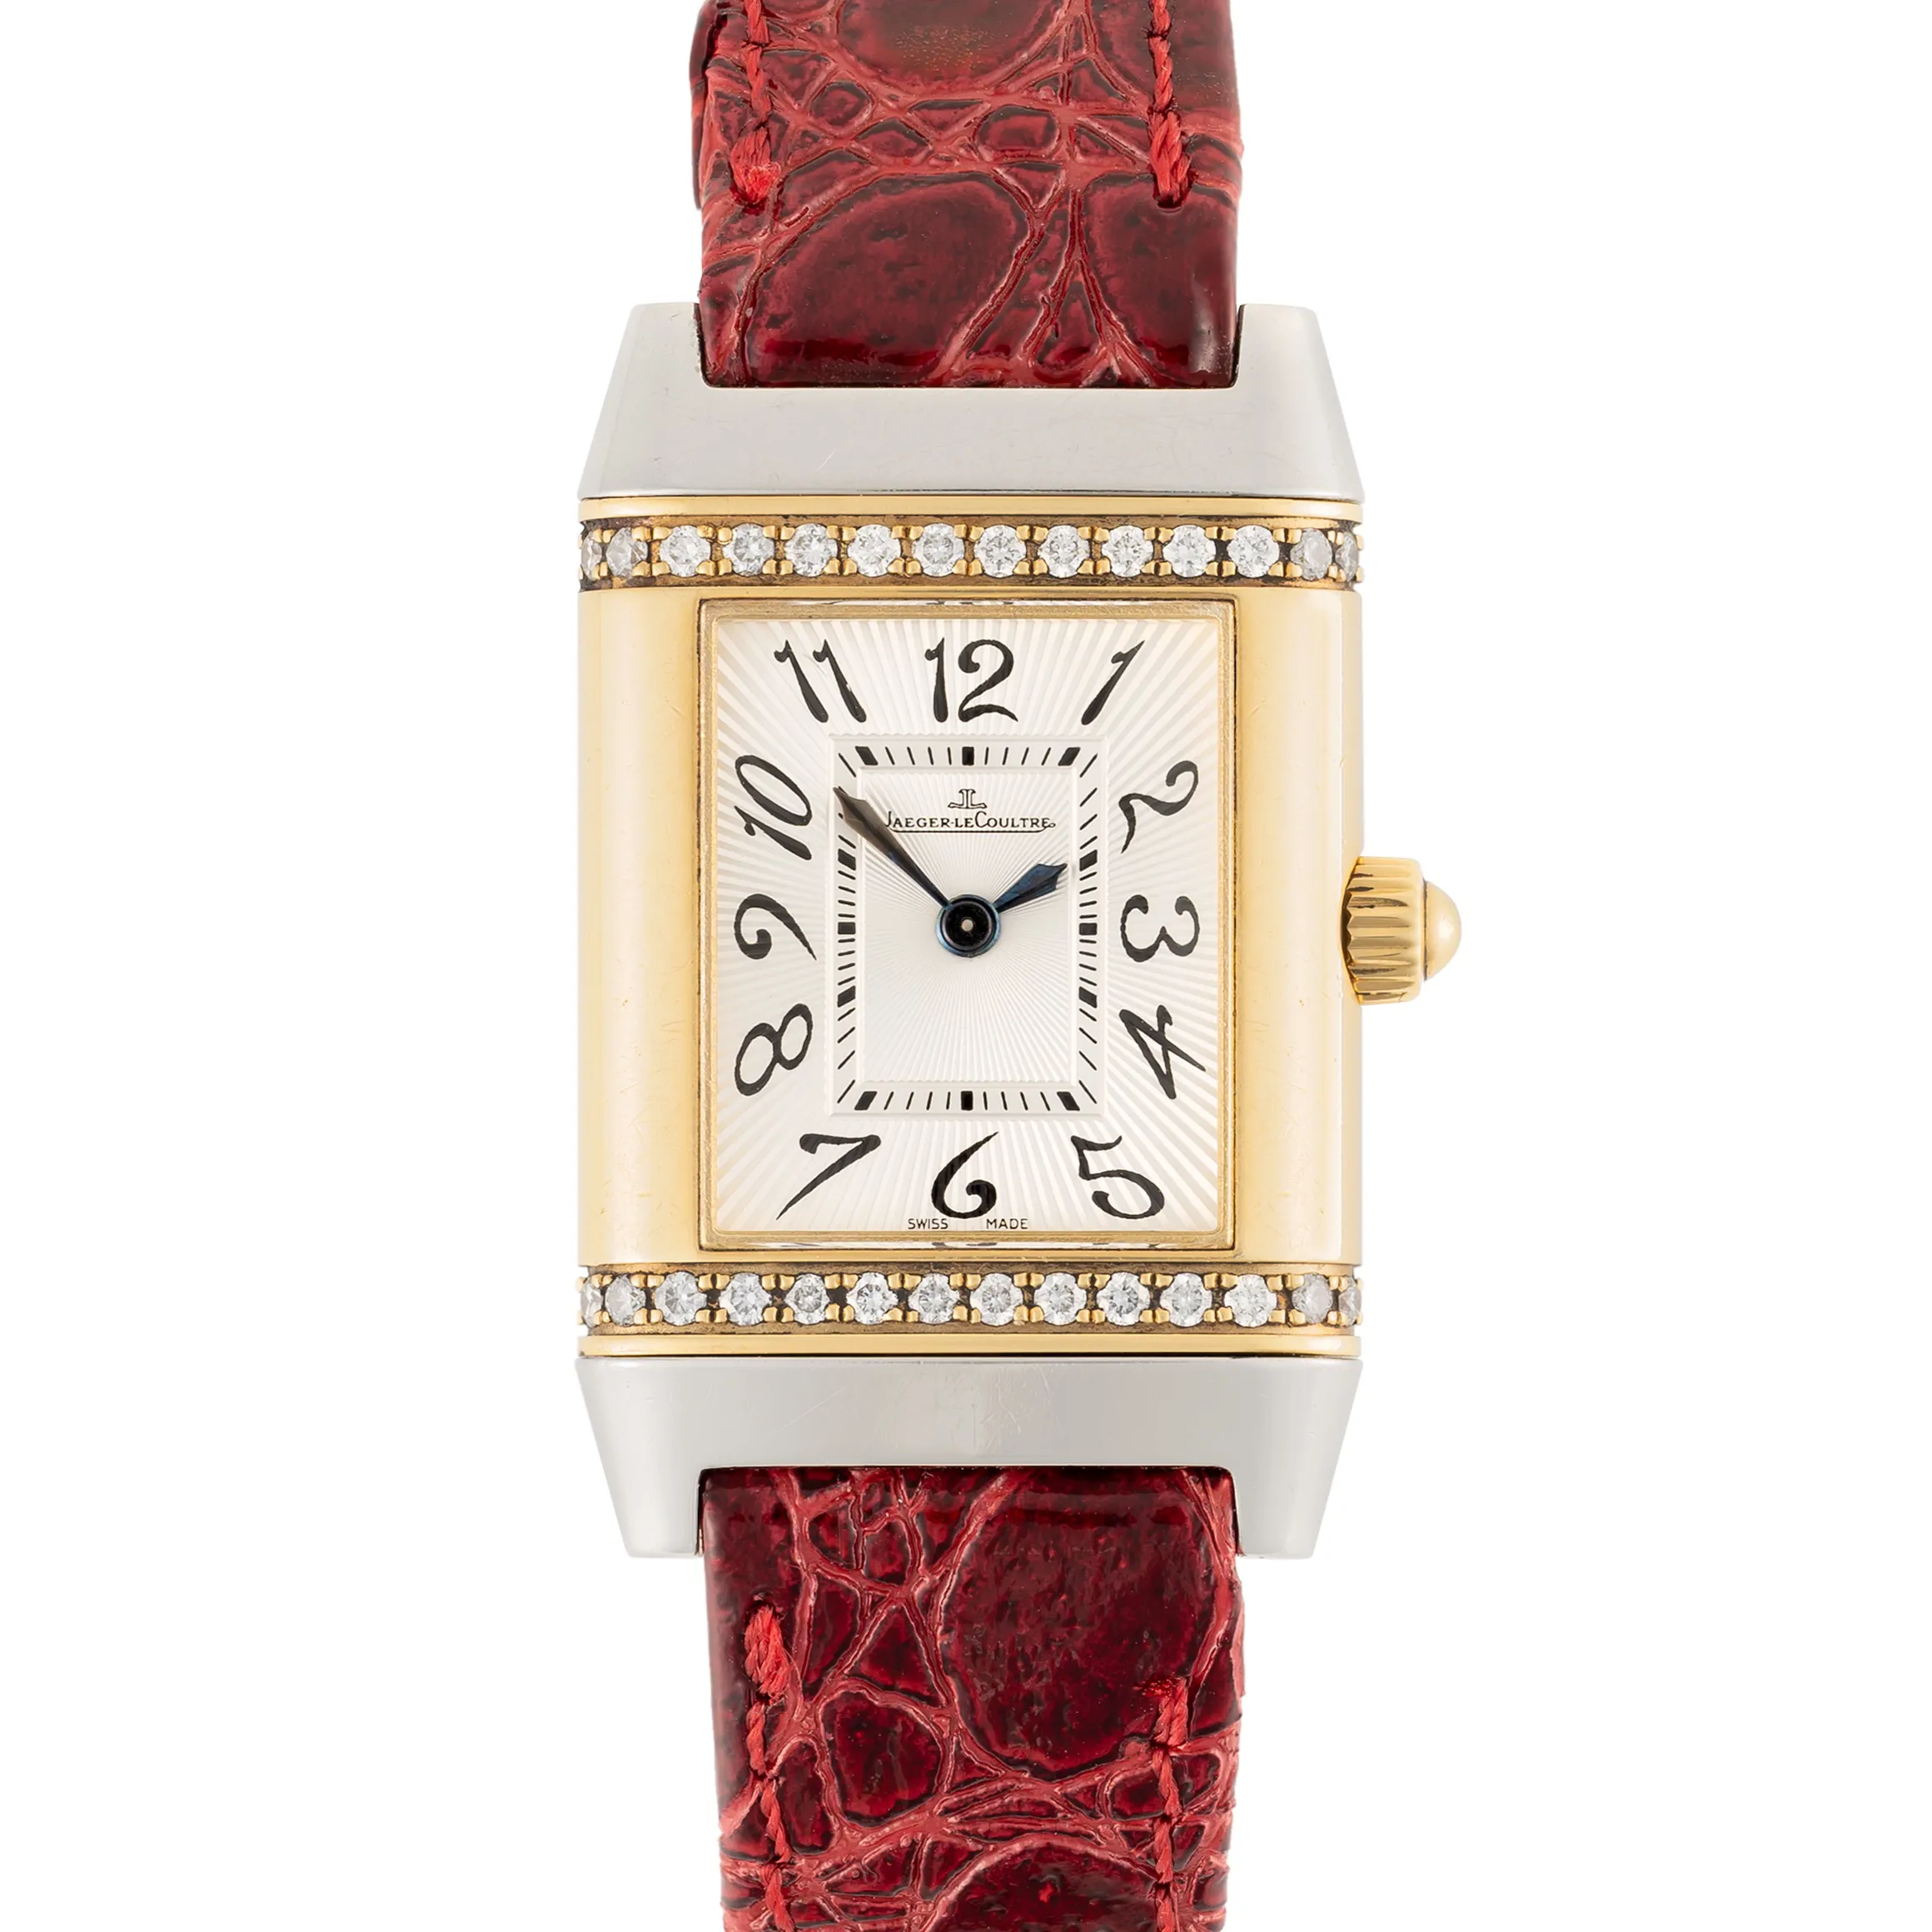 Jaeger-LeCoultre Reverso 265.5.08 21mm Stainless steel, gold and diamond-set